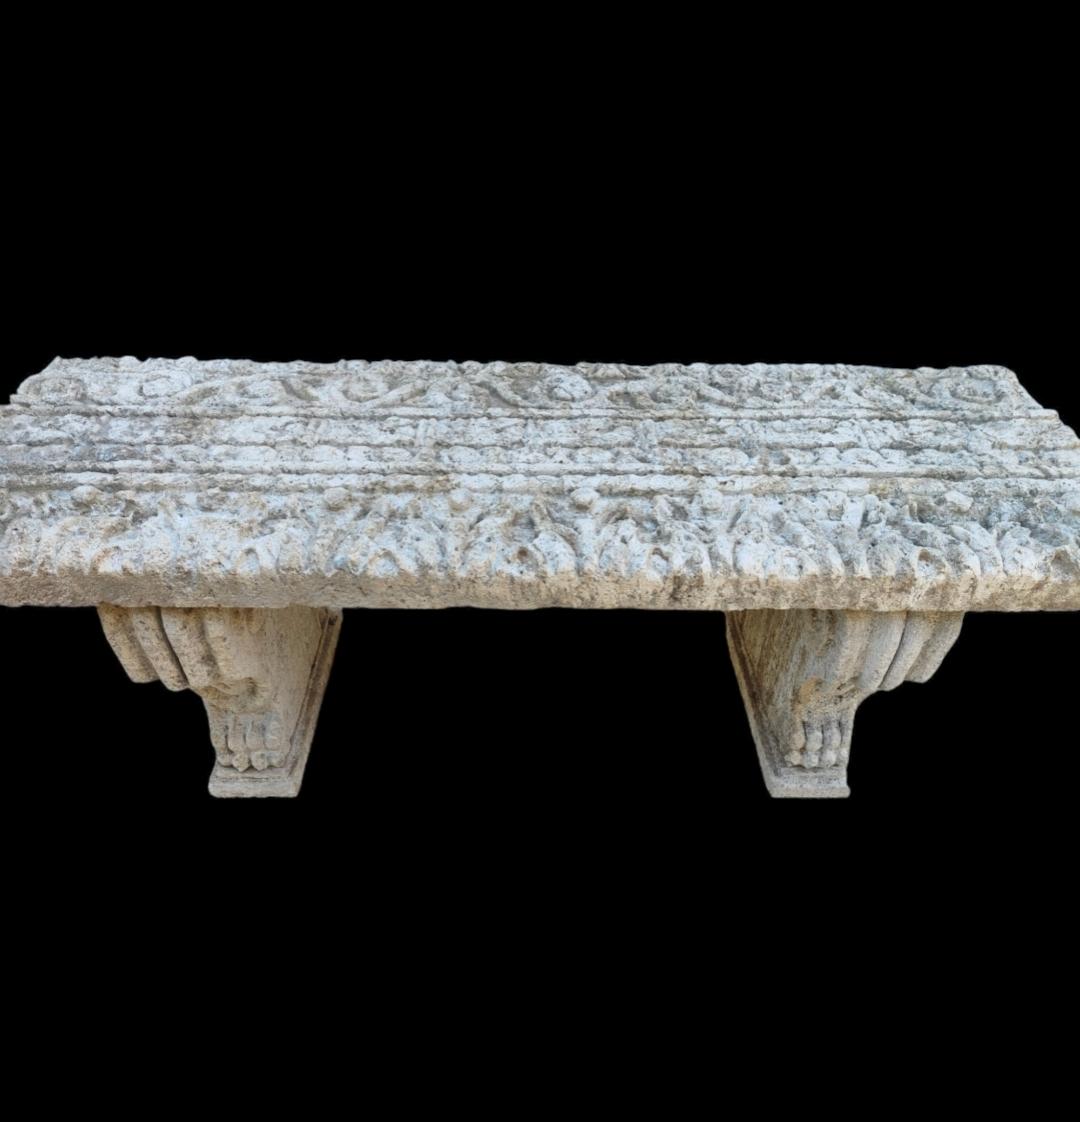 Limestone Very Rare & Old Hand-Carved 1700s France Lime Stone Demi-Inlaid Reclaimed Table For Sale